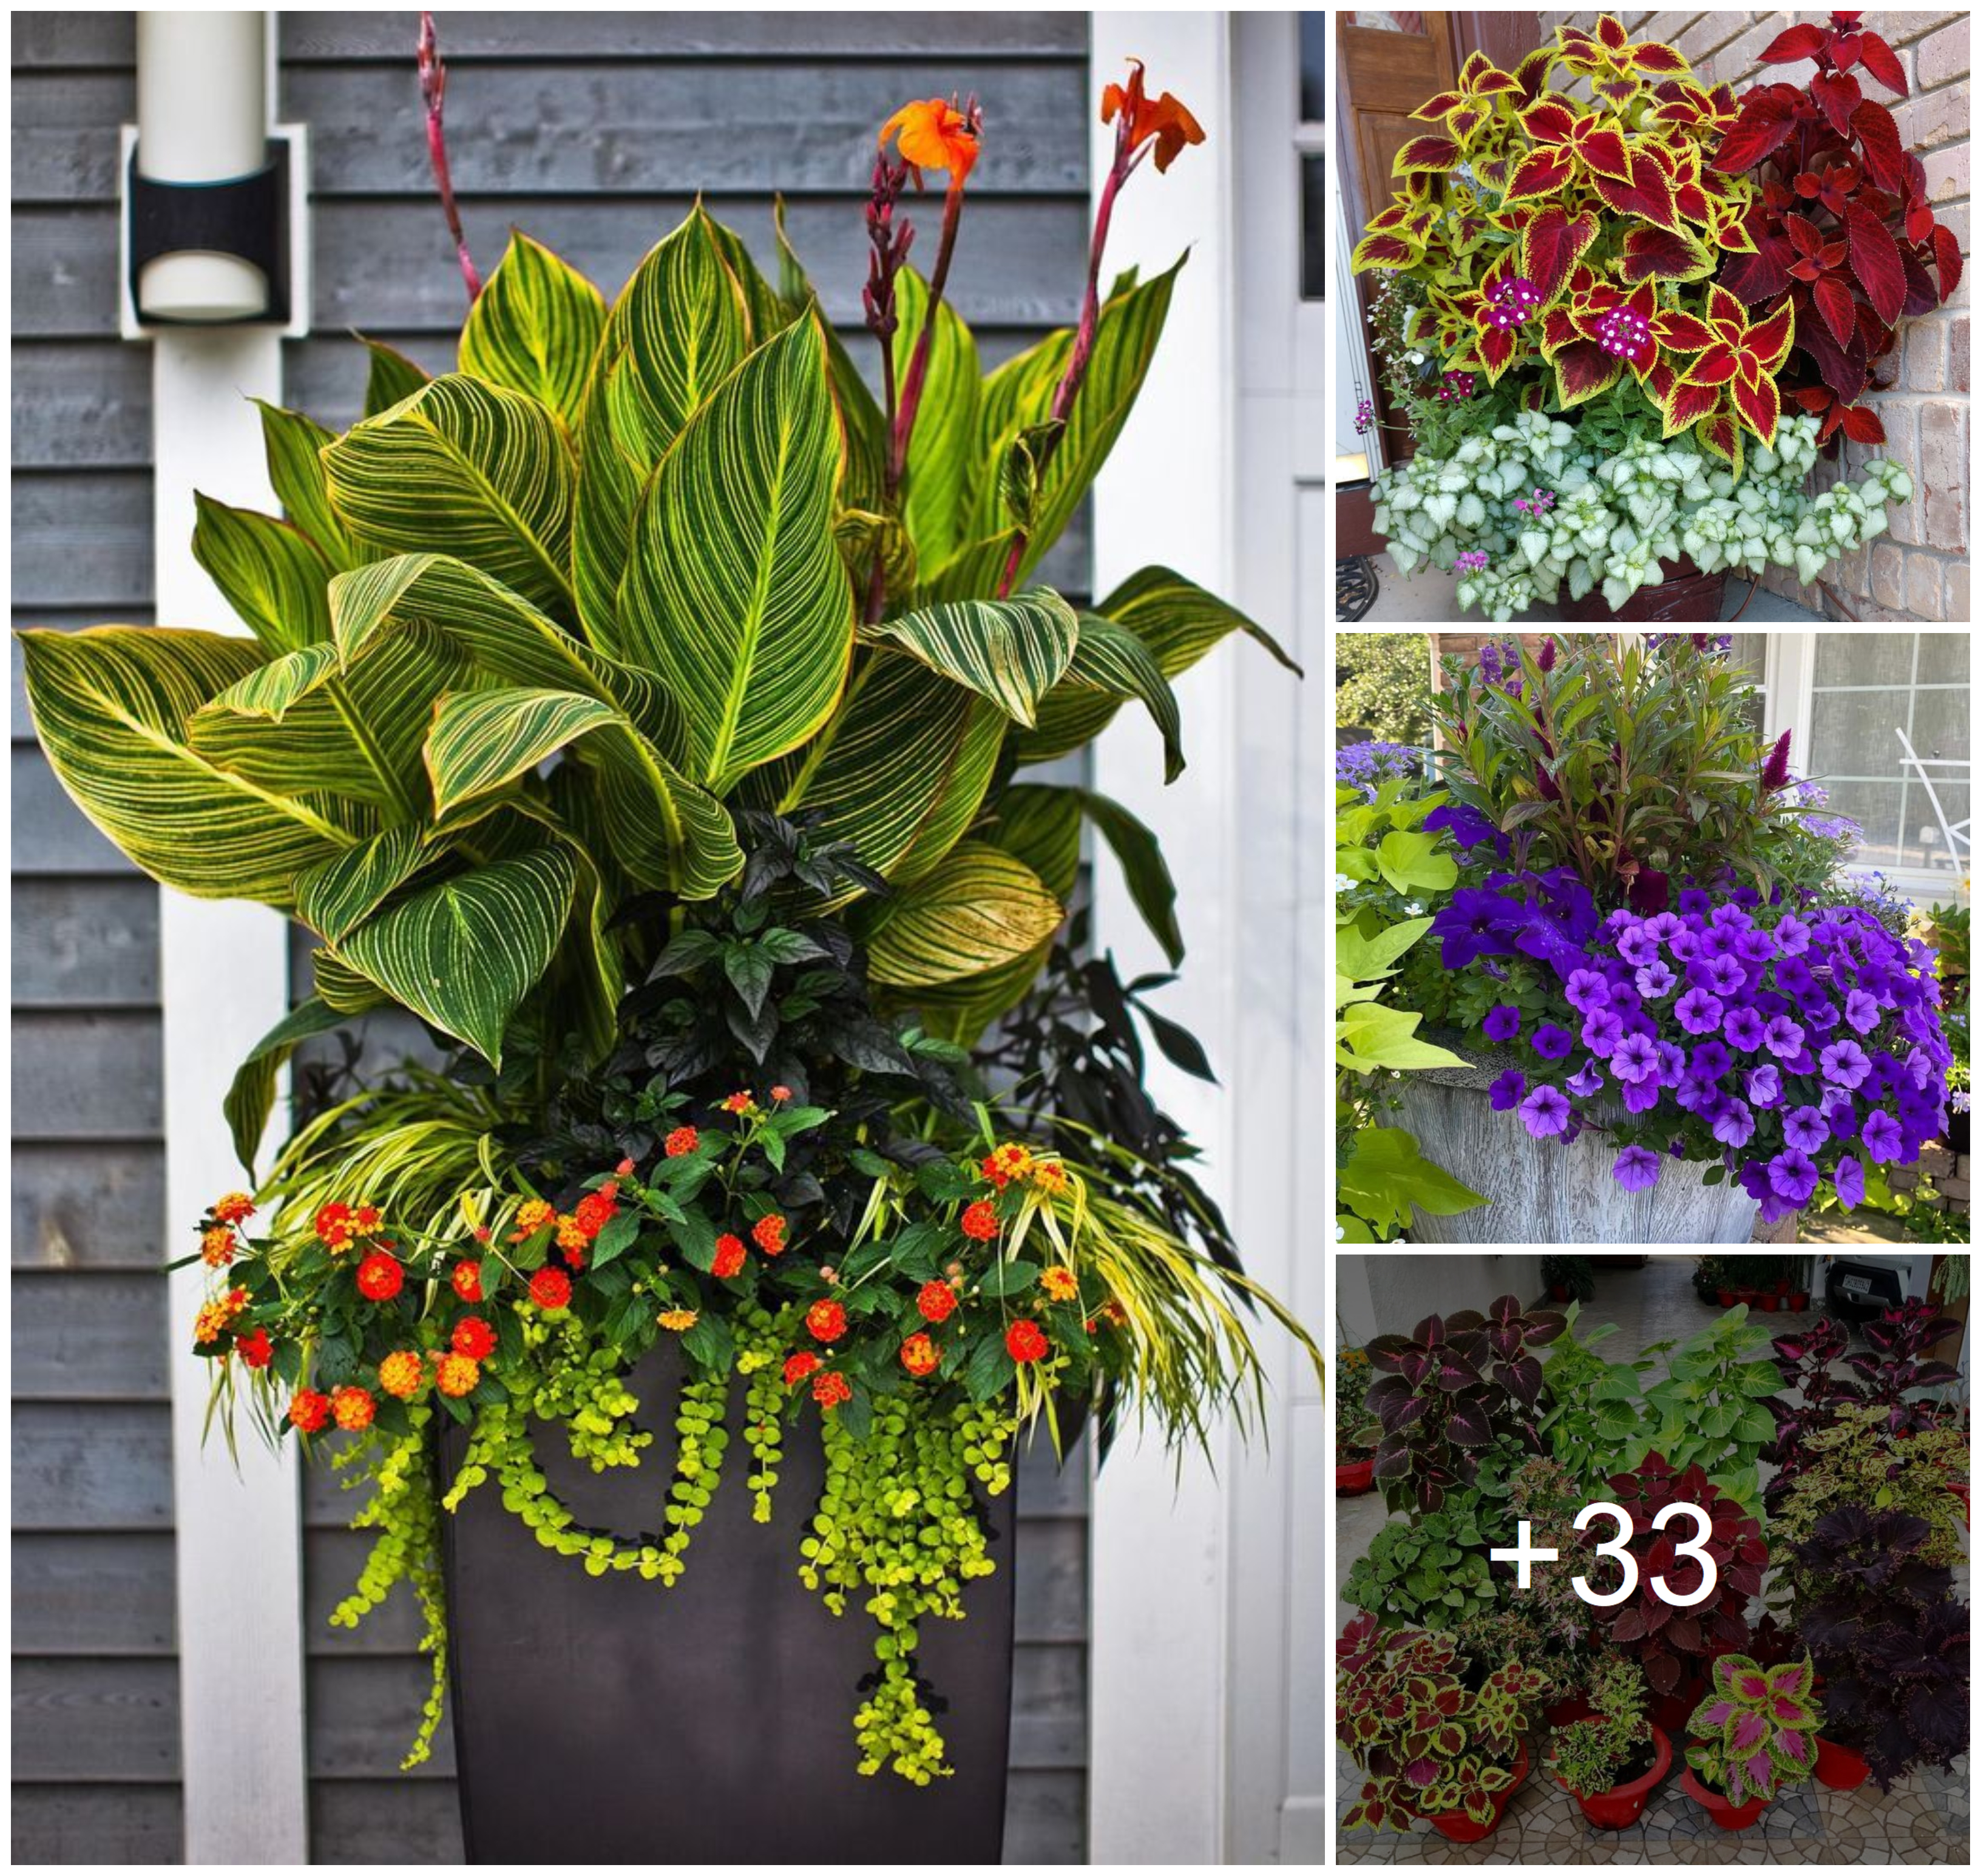 Beautify your porch with charming decorative pots and flowers